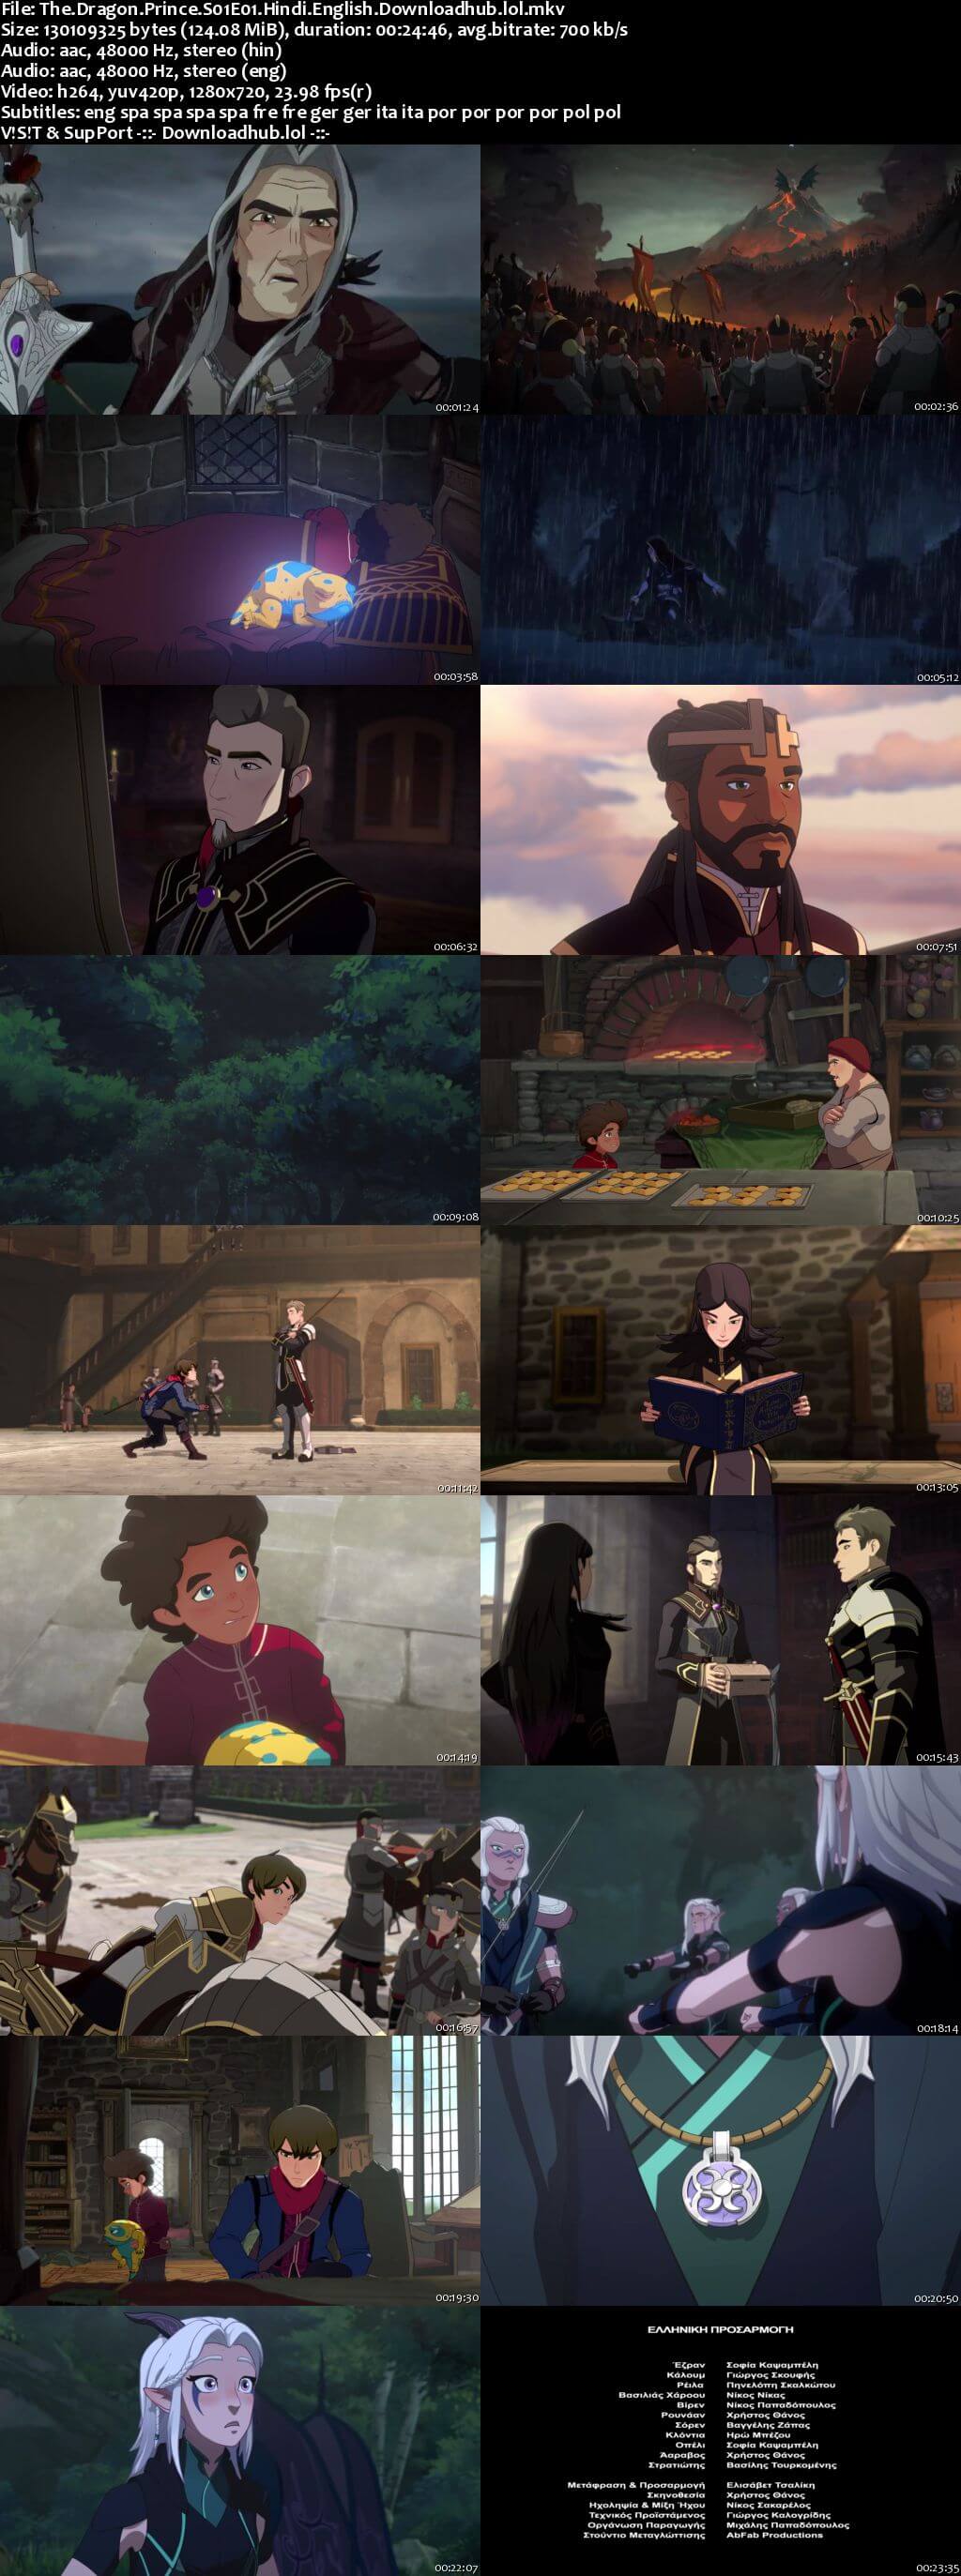 The Dragon Prince S01 Complete Hindi Dual Audio 720p Web-DL MSubs